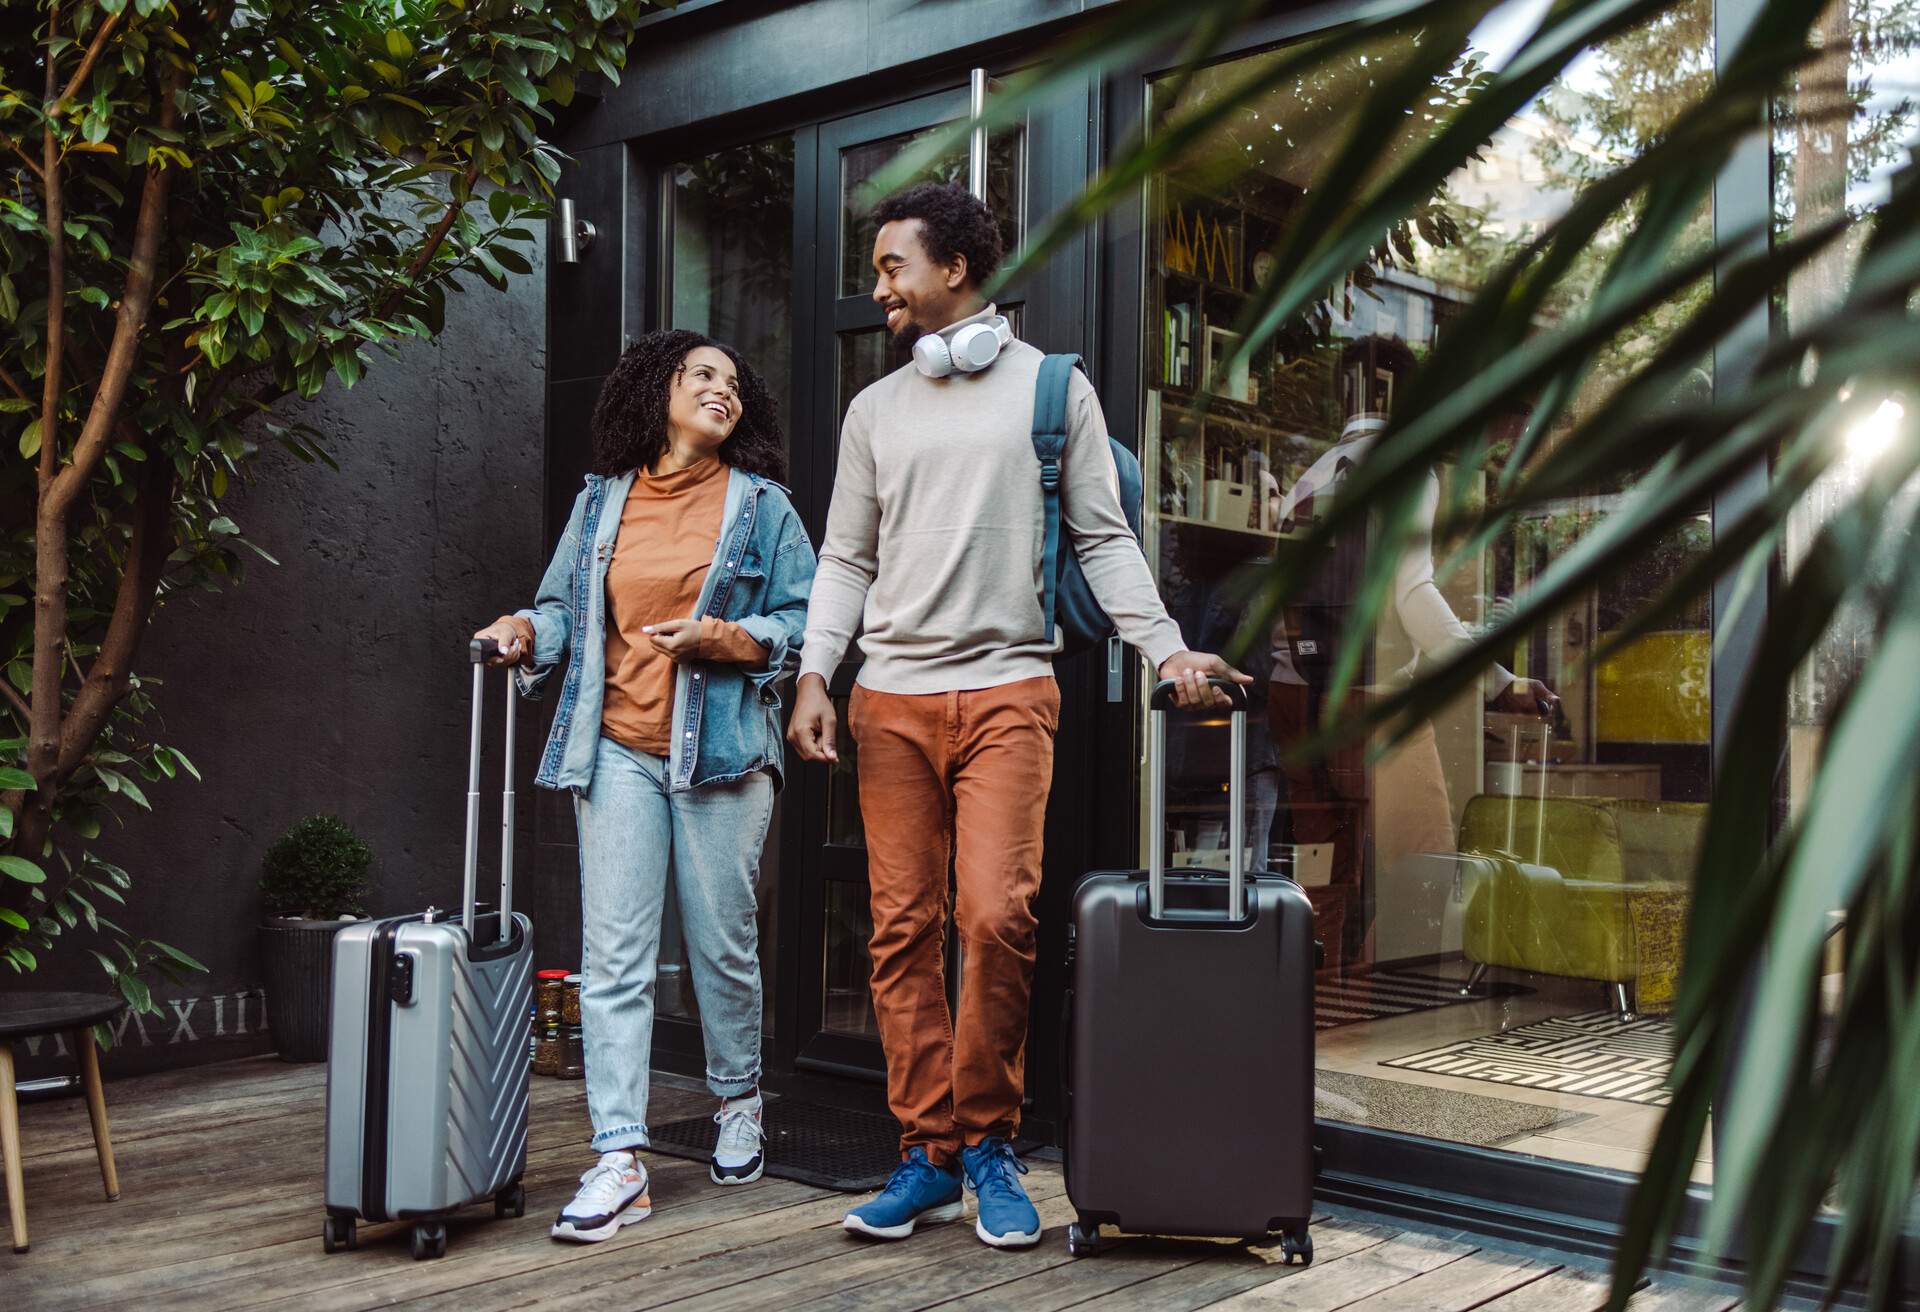 A young couple standing at the building entrance with their suitcases.